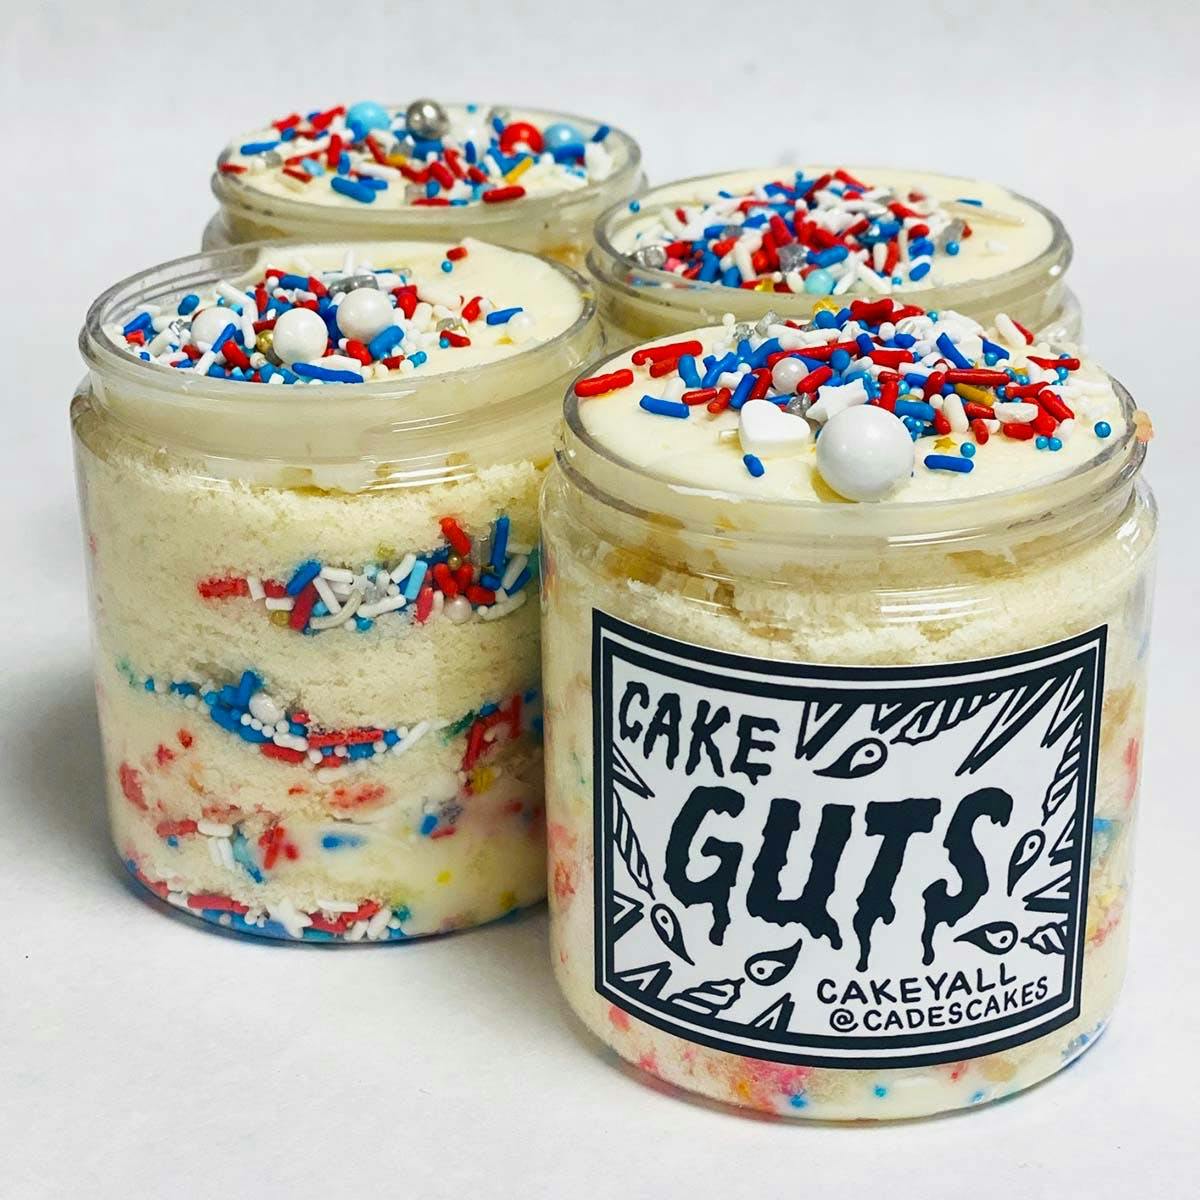 Red, White & Blue Funfetti Cake Guts by Cades Cakes